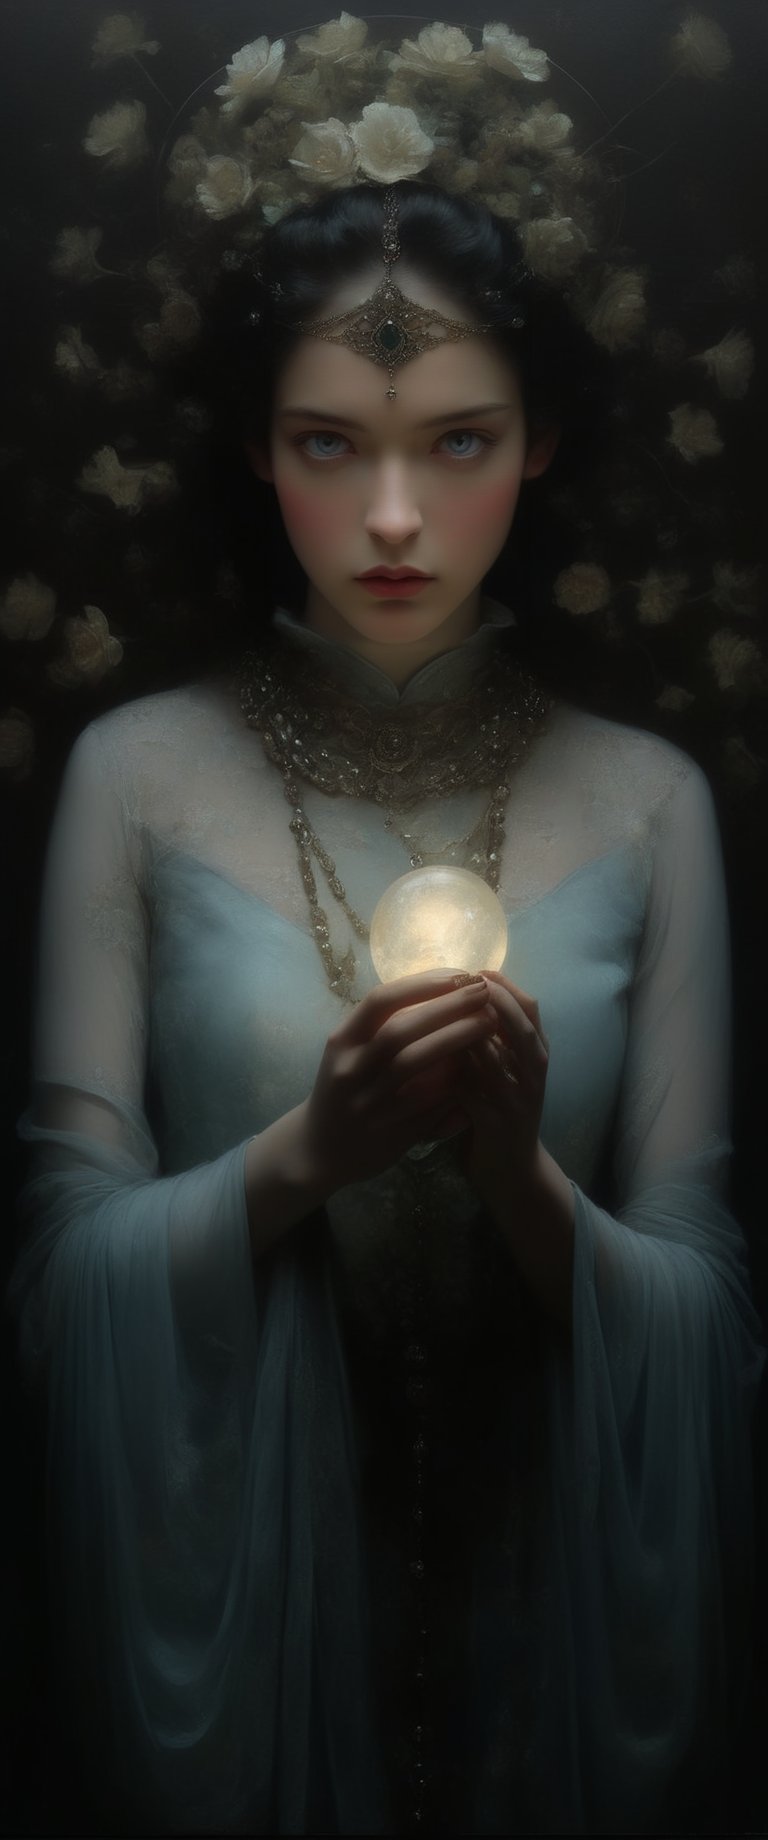 Your words are like a thousand sharp daggers to her heart, her eyes hides the sorrow you've inflicted, Pal Szinyei Merse, Raqib Shaw, tom Bagshaw, Theophile Steinlen, Tim Walker, ct-fujiii